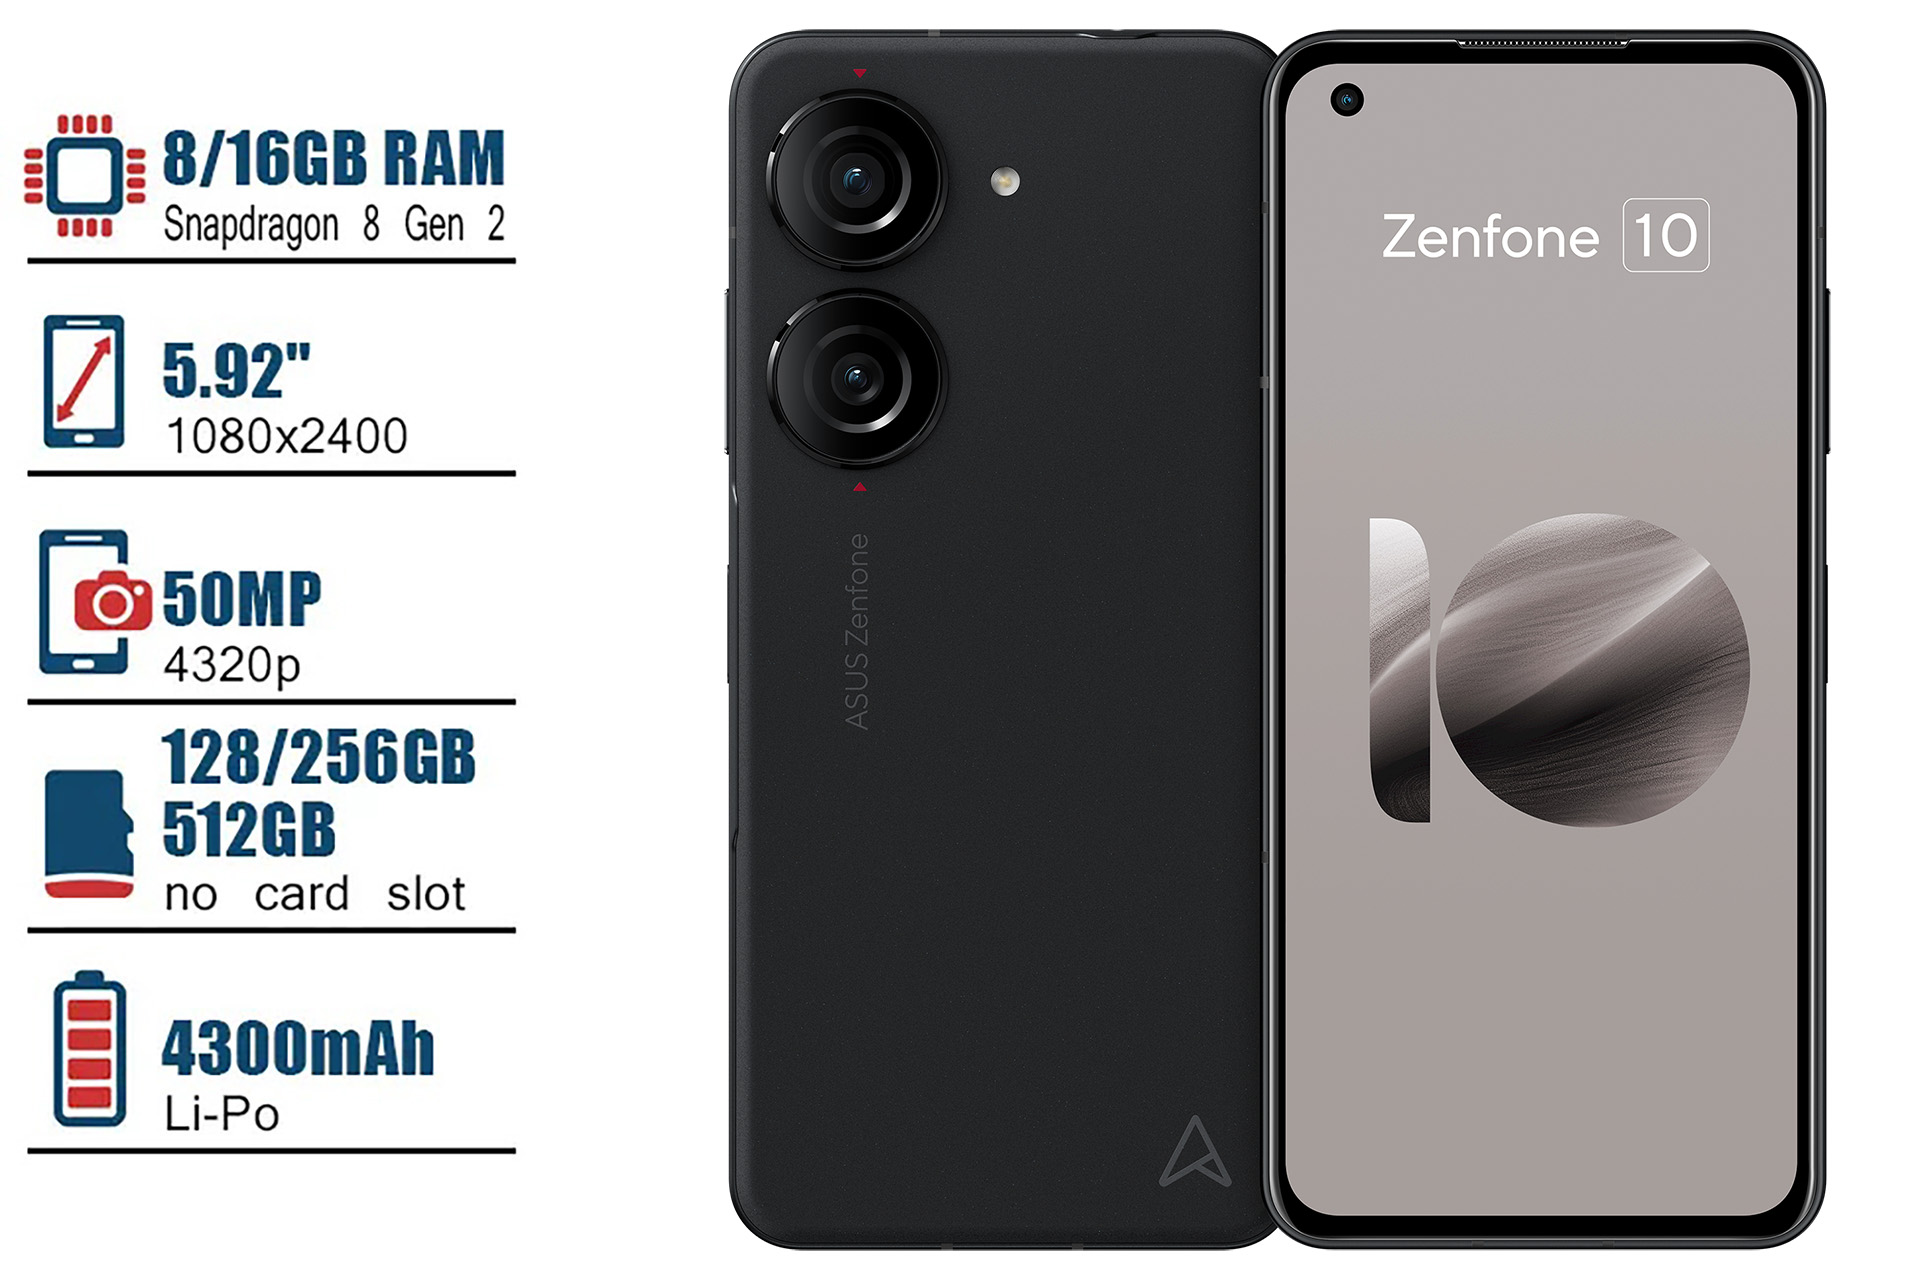 Asus Zenfone 10 Review, Specifications, Price, Latest News